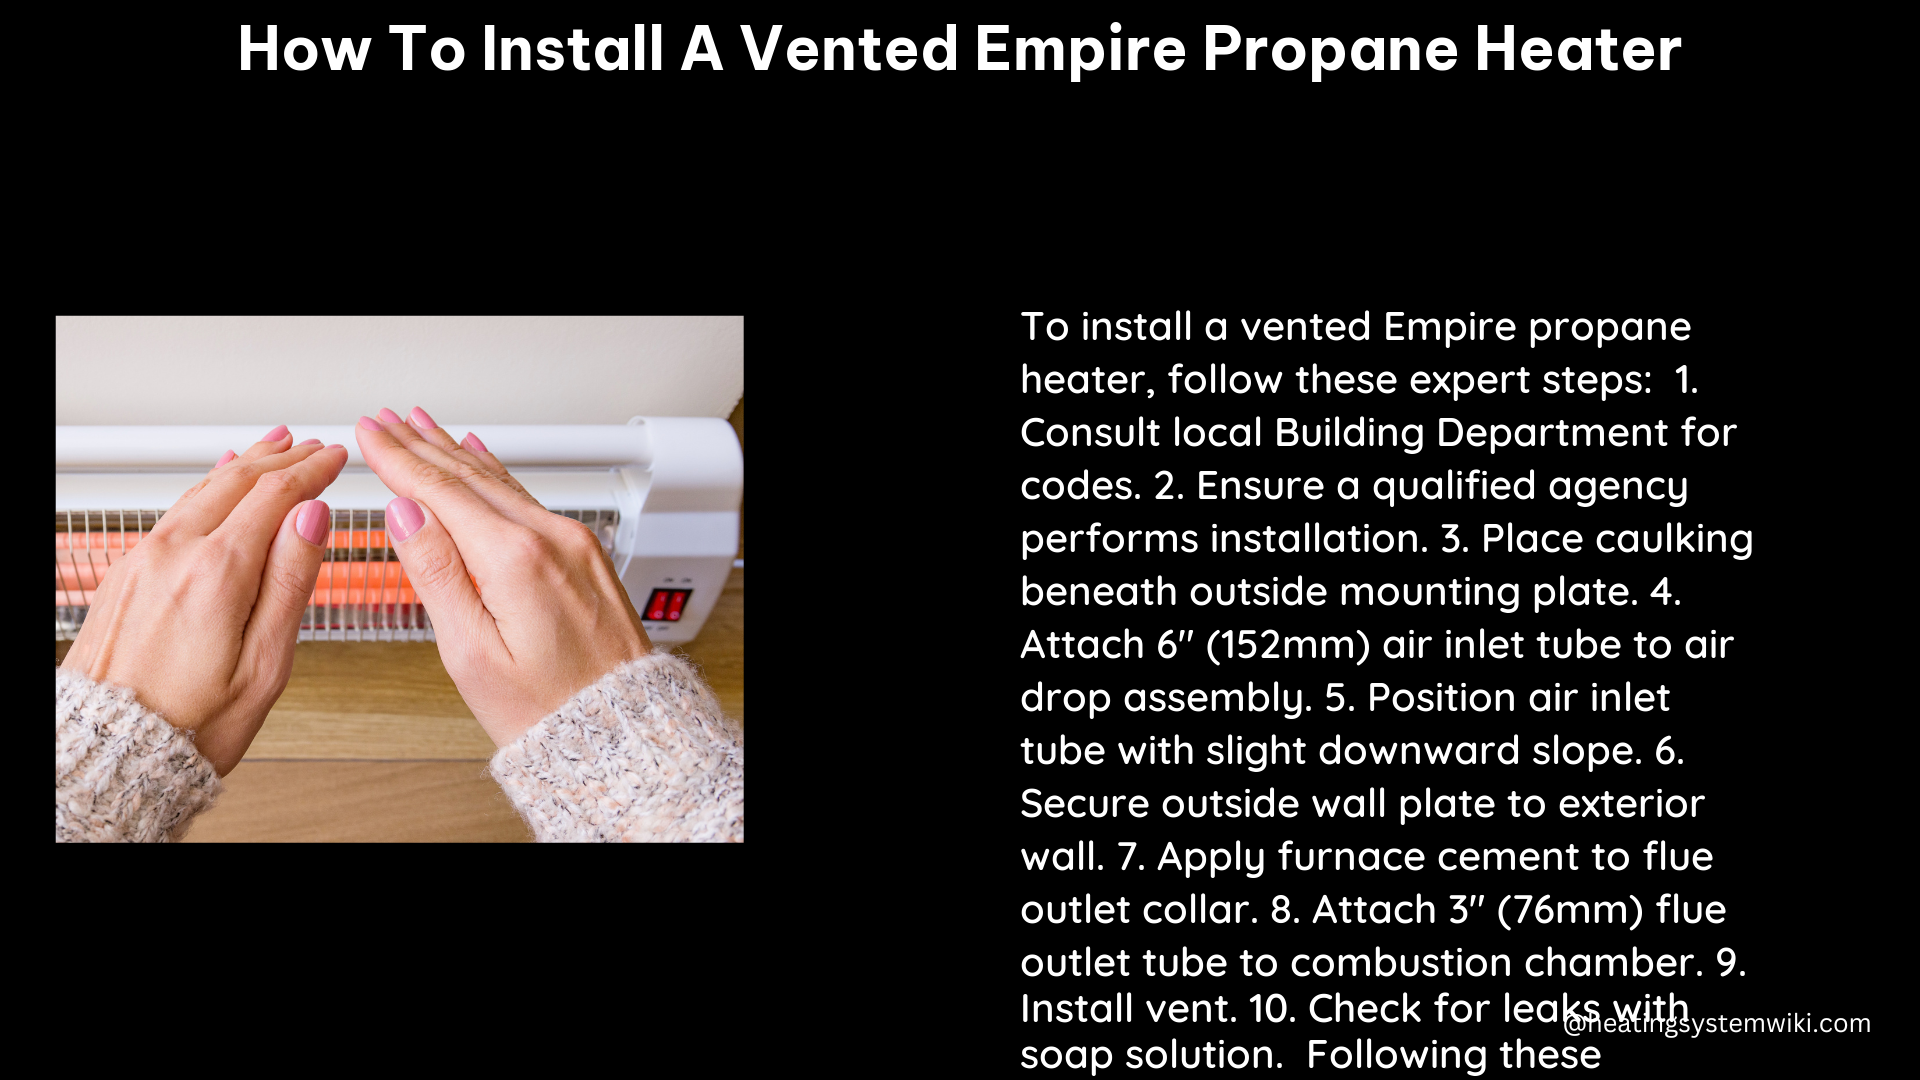 how to install a vented empire propane heater